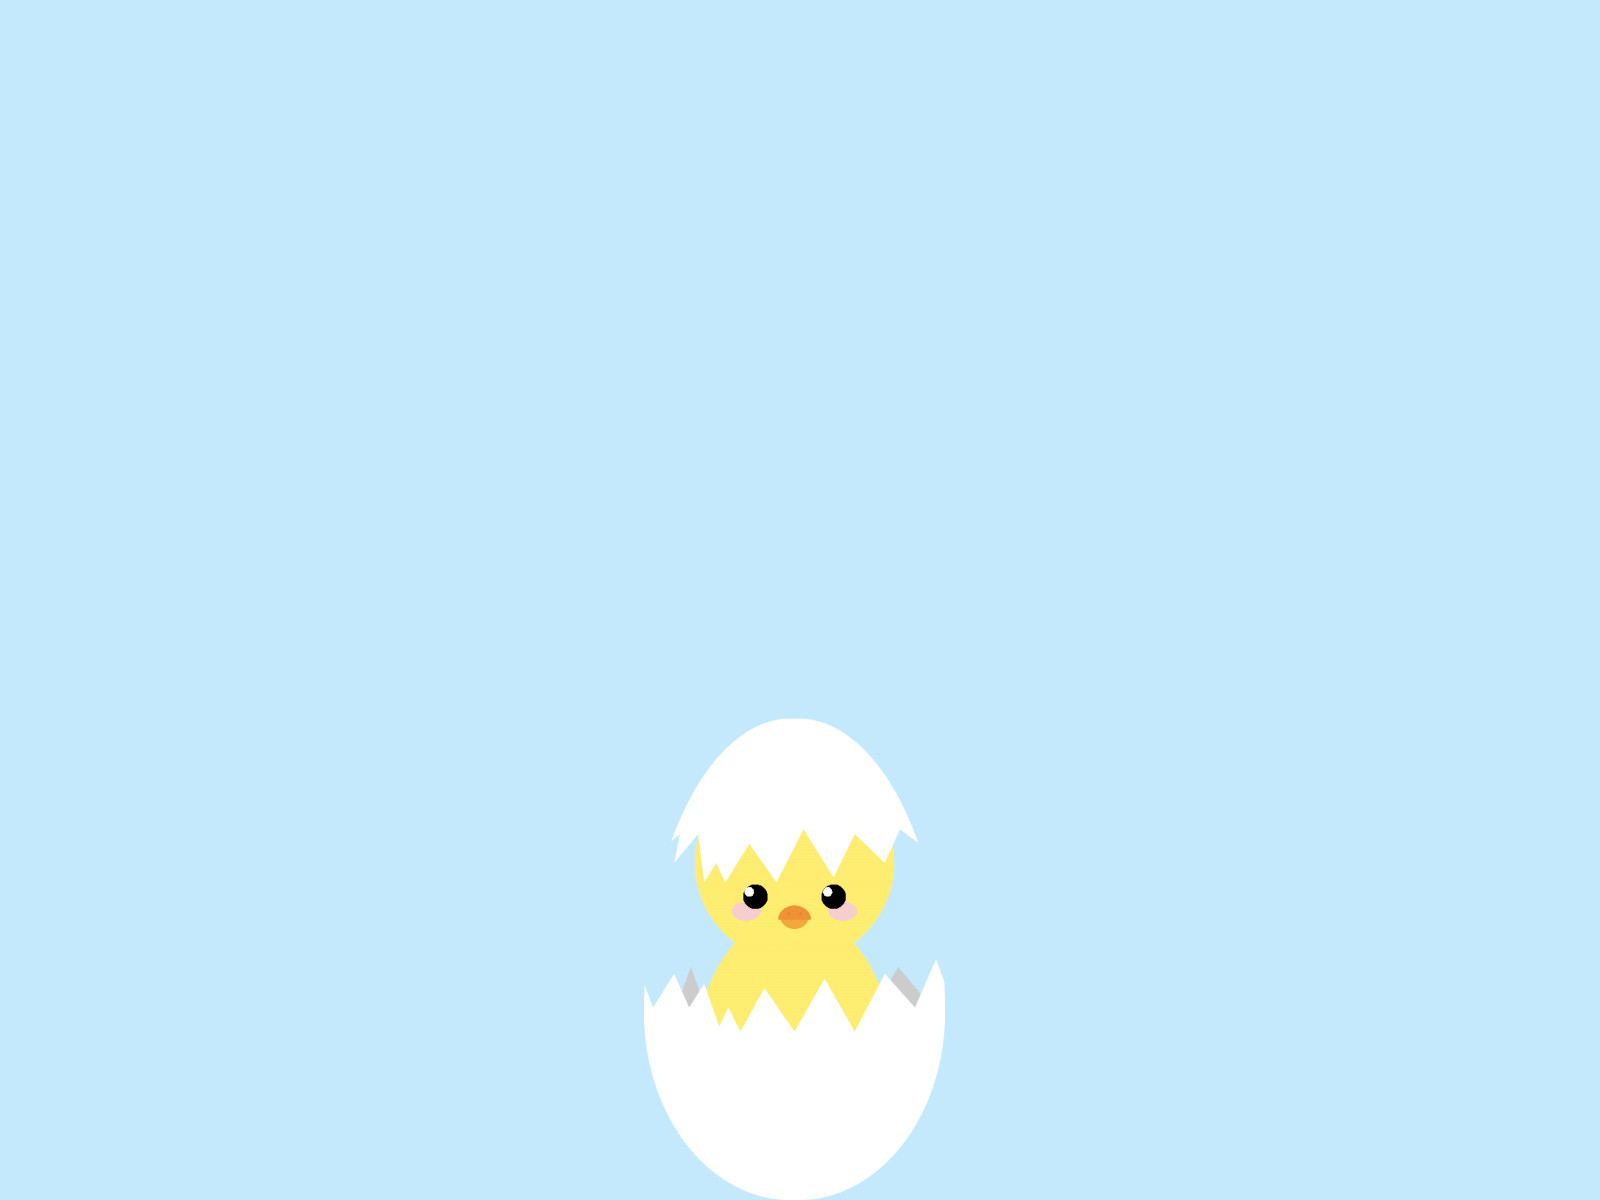 Cartoon of a chick coming out of an egg